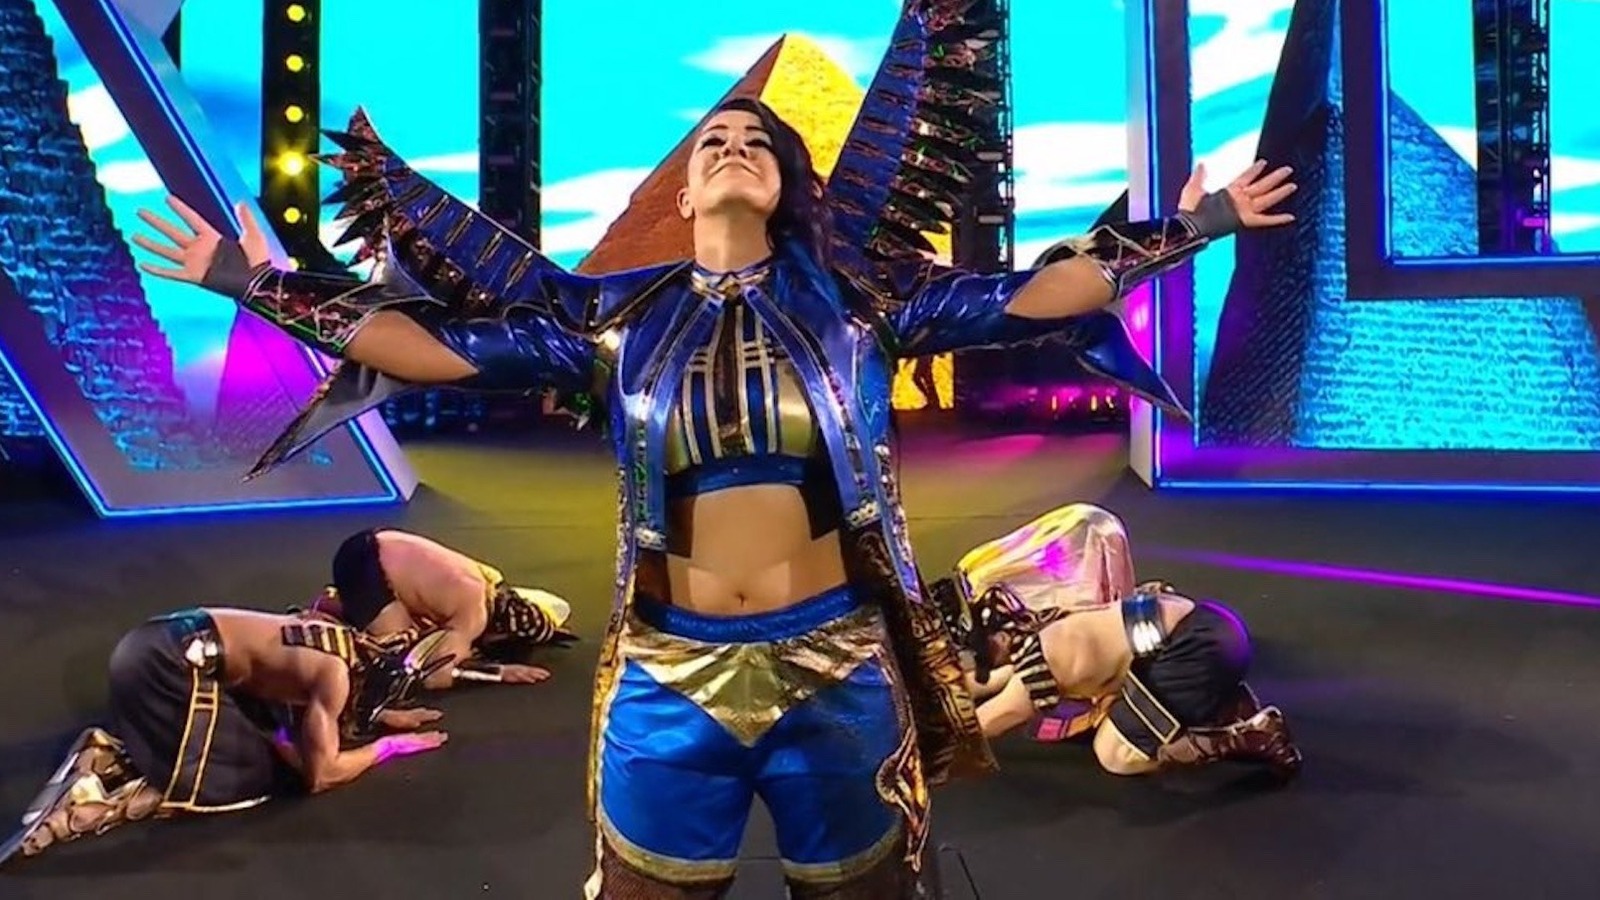 Bayley defeats IYO SKY to win the WWE Women's Title at WrestleMania 40 while Philadelphia sings